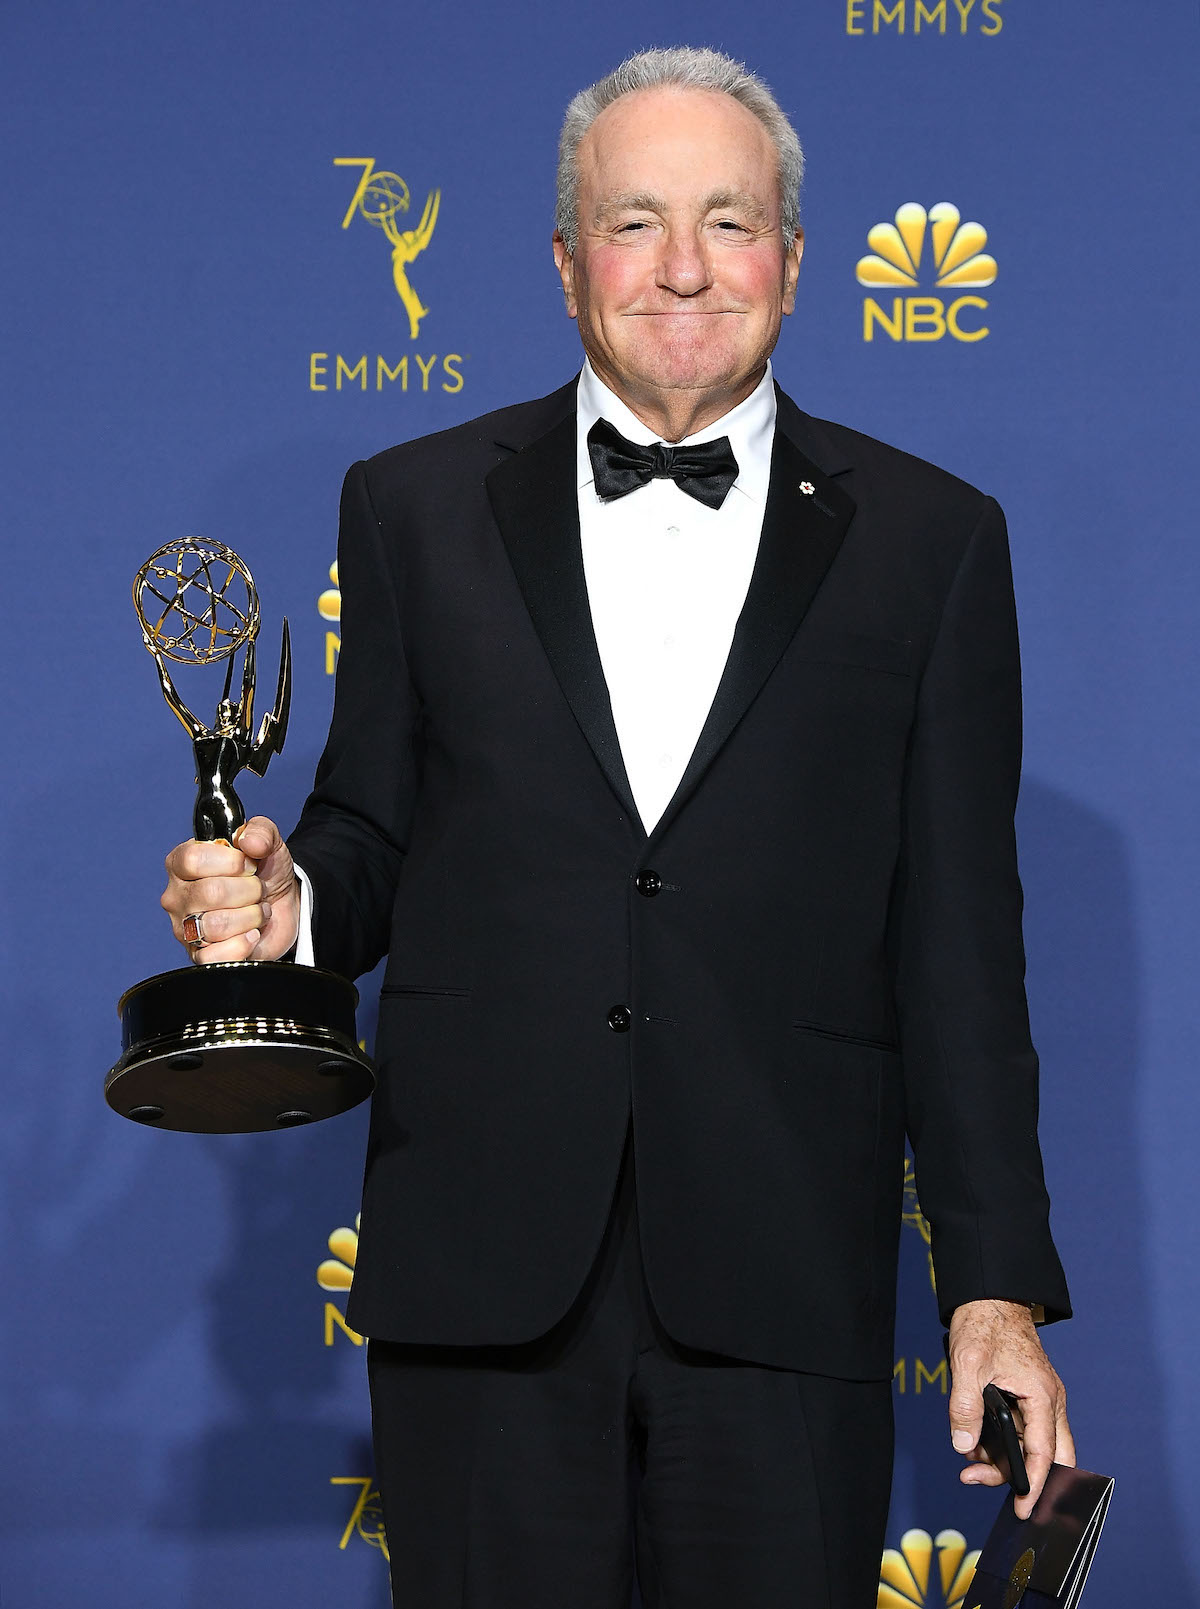 Lorne Michaels in a tuxedo smiling and holding an Emmy Award.